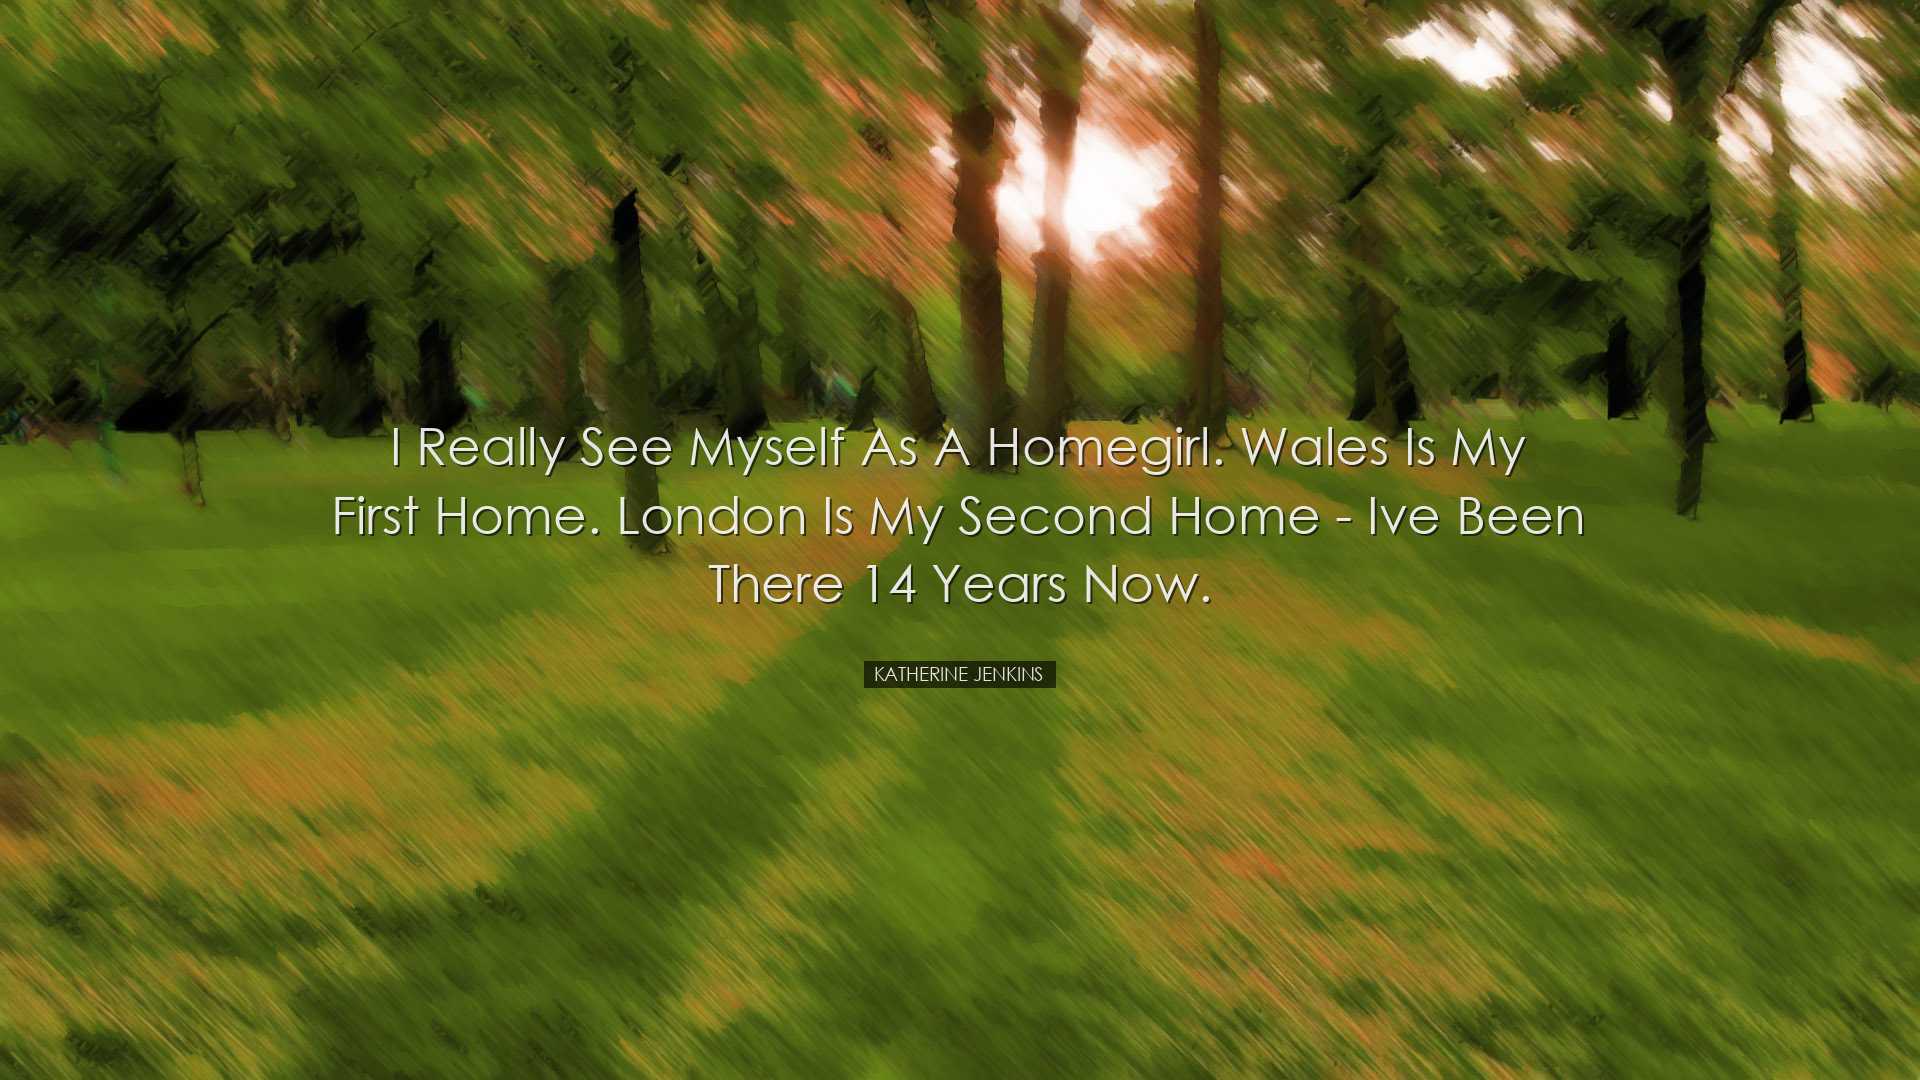 I really see myself as a homegirl. Wales is my first home. London